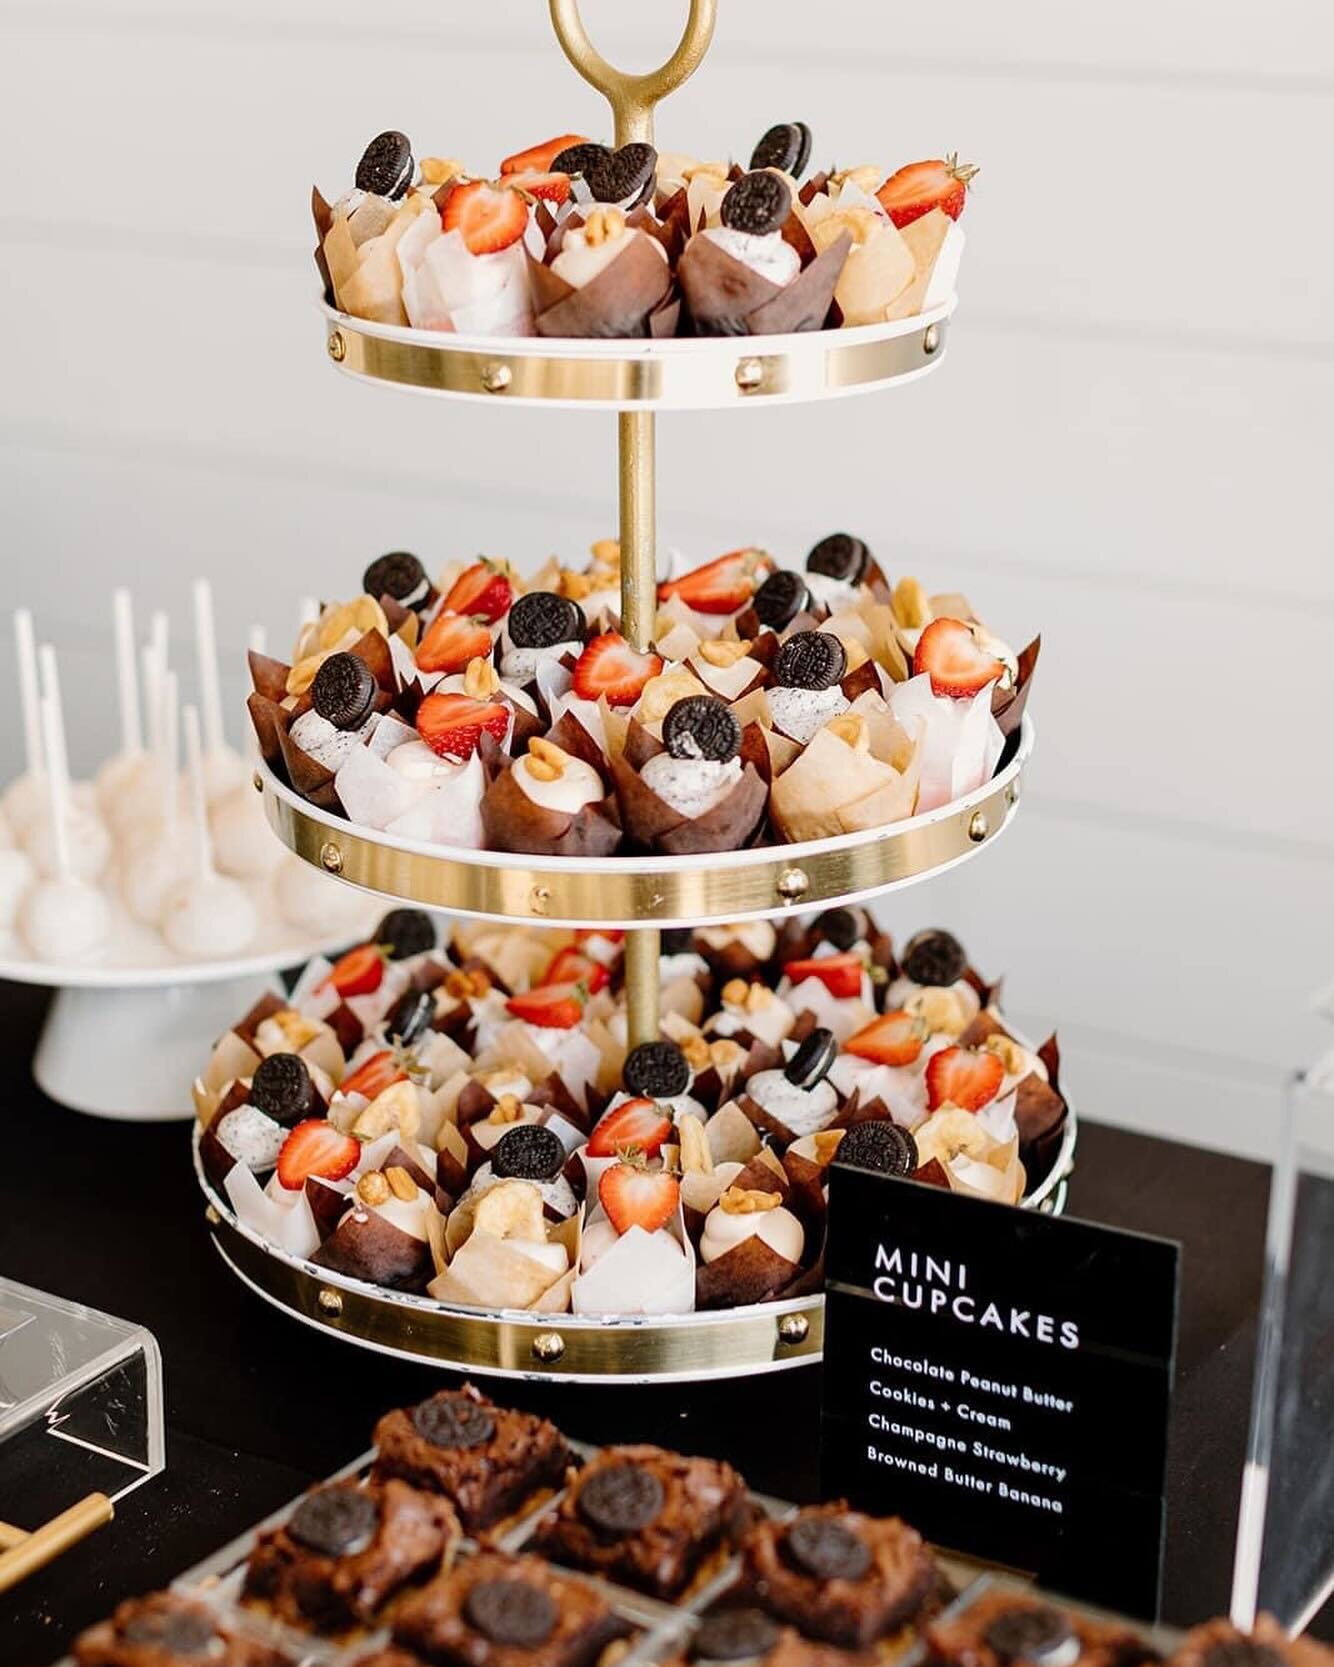 The biggest compliment I&rsquo;ve ever received:

&ldquo;As soon as I saw the desserts, I KNEW it was by Kate Smith Soir&eacute;e without a doubt in my mind&rdquo;

The years I&rsquo;ve put into building this brand and staying true to my style, that 